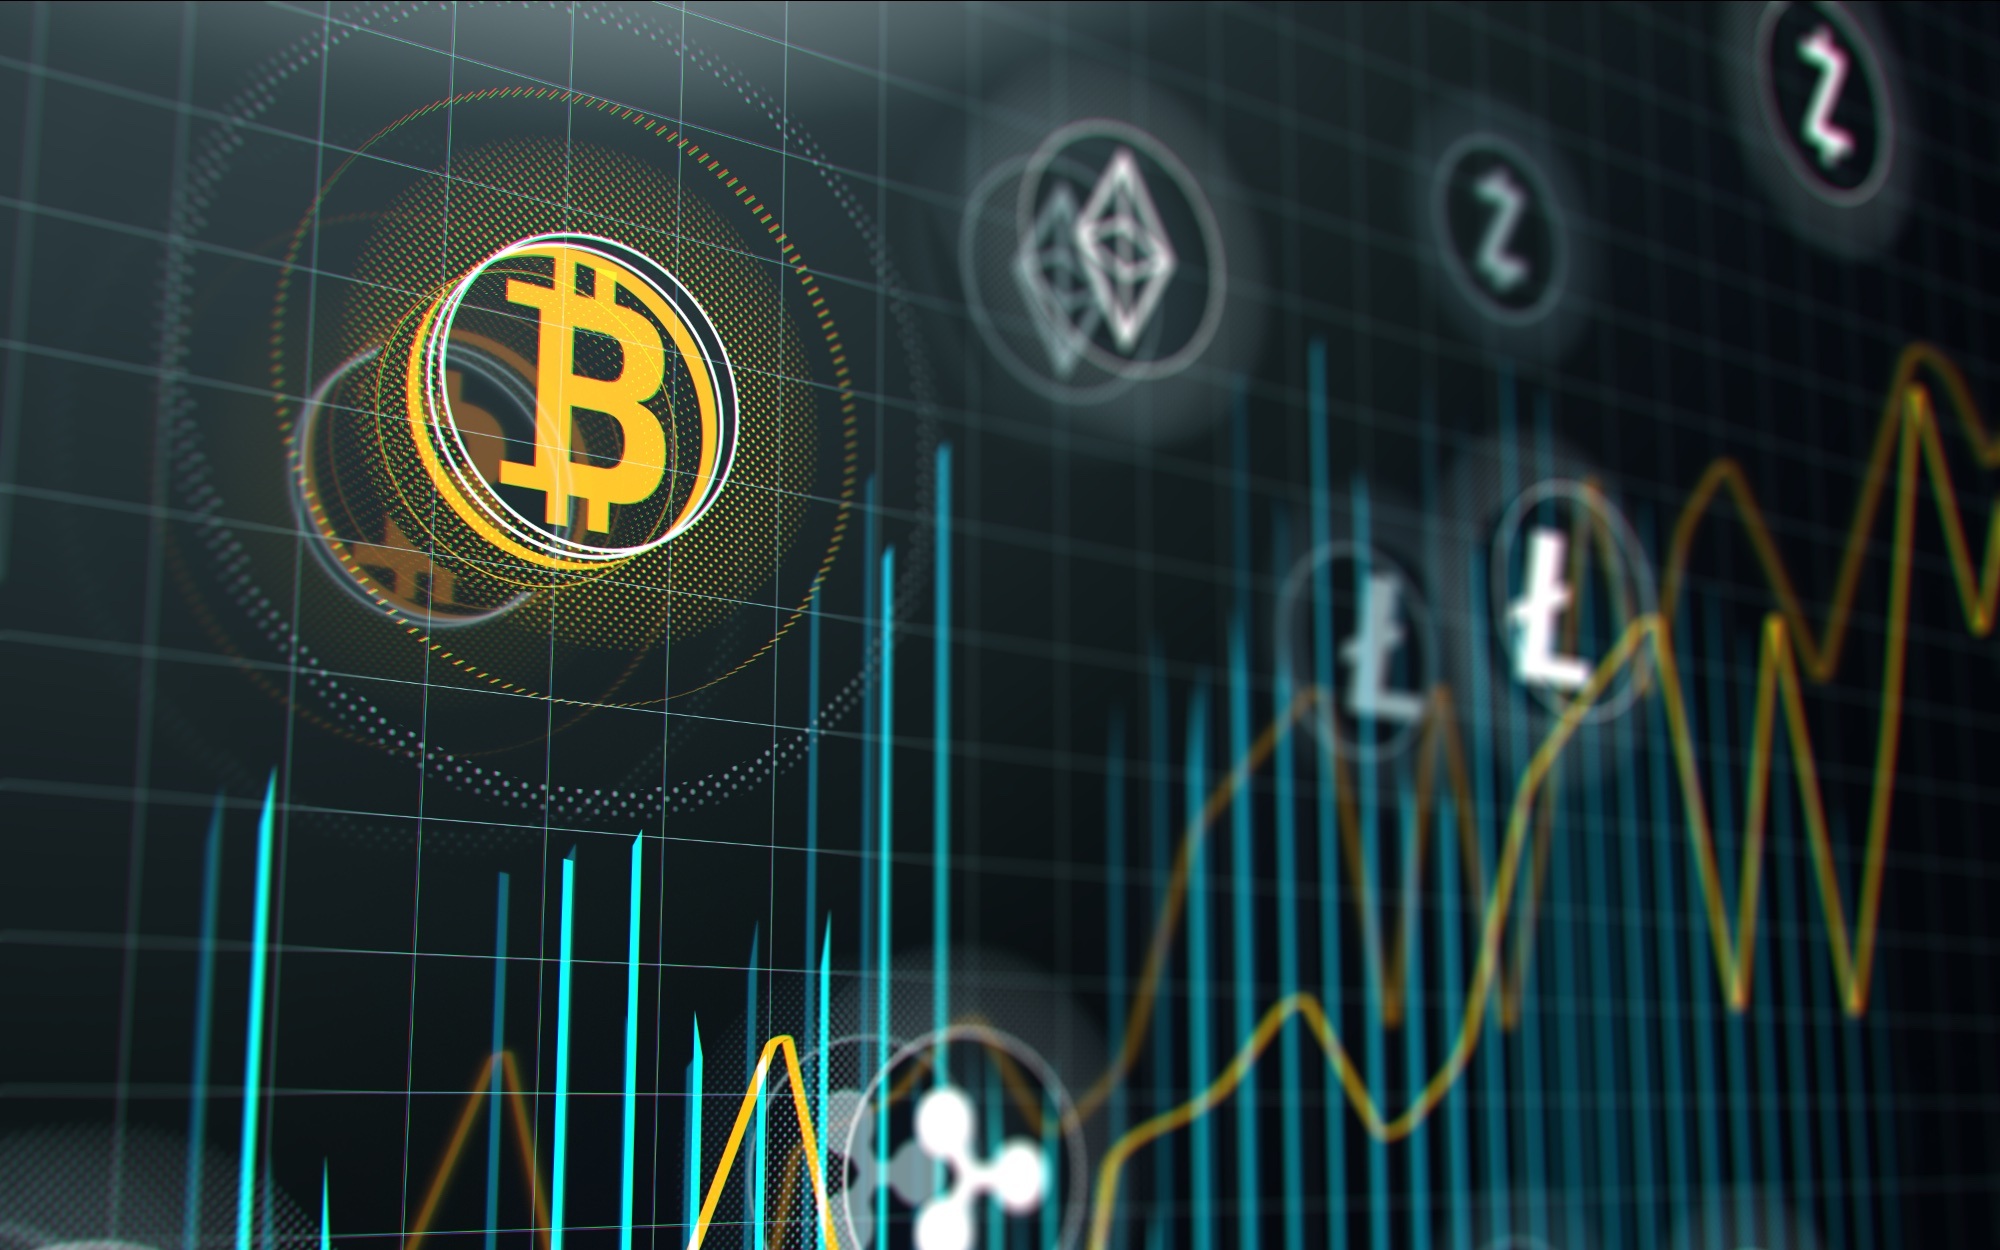 Why should you consider trading bitcoin?